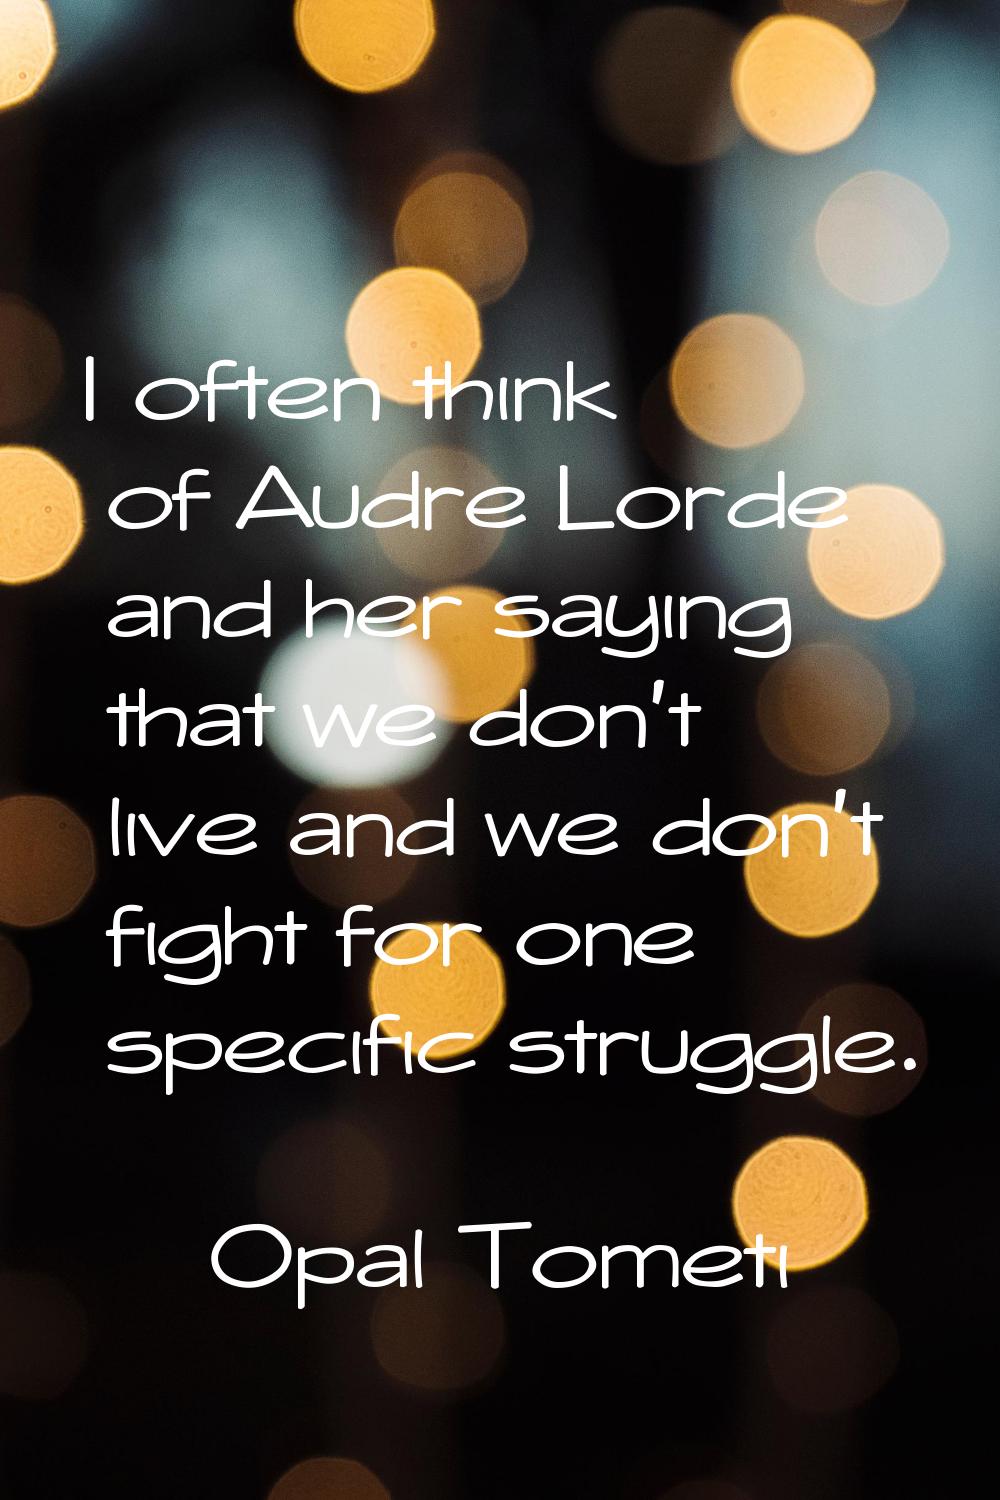 I often think of Audre Lorde and her saying that we don't live and we don't fight for one specific 